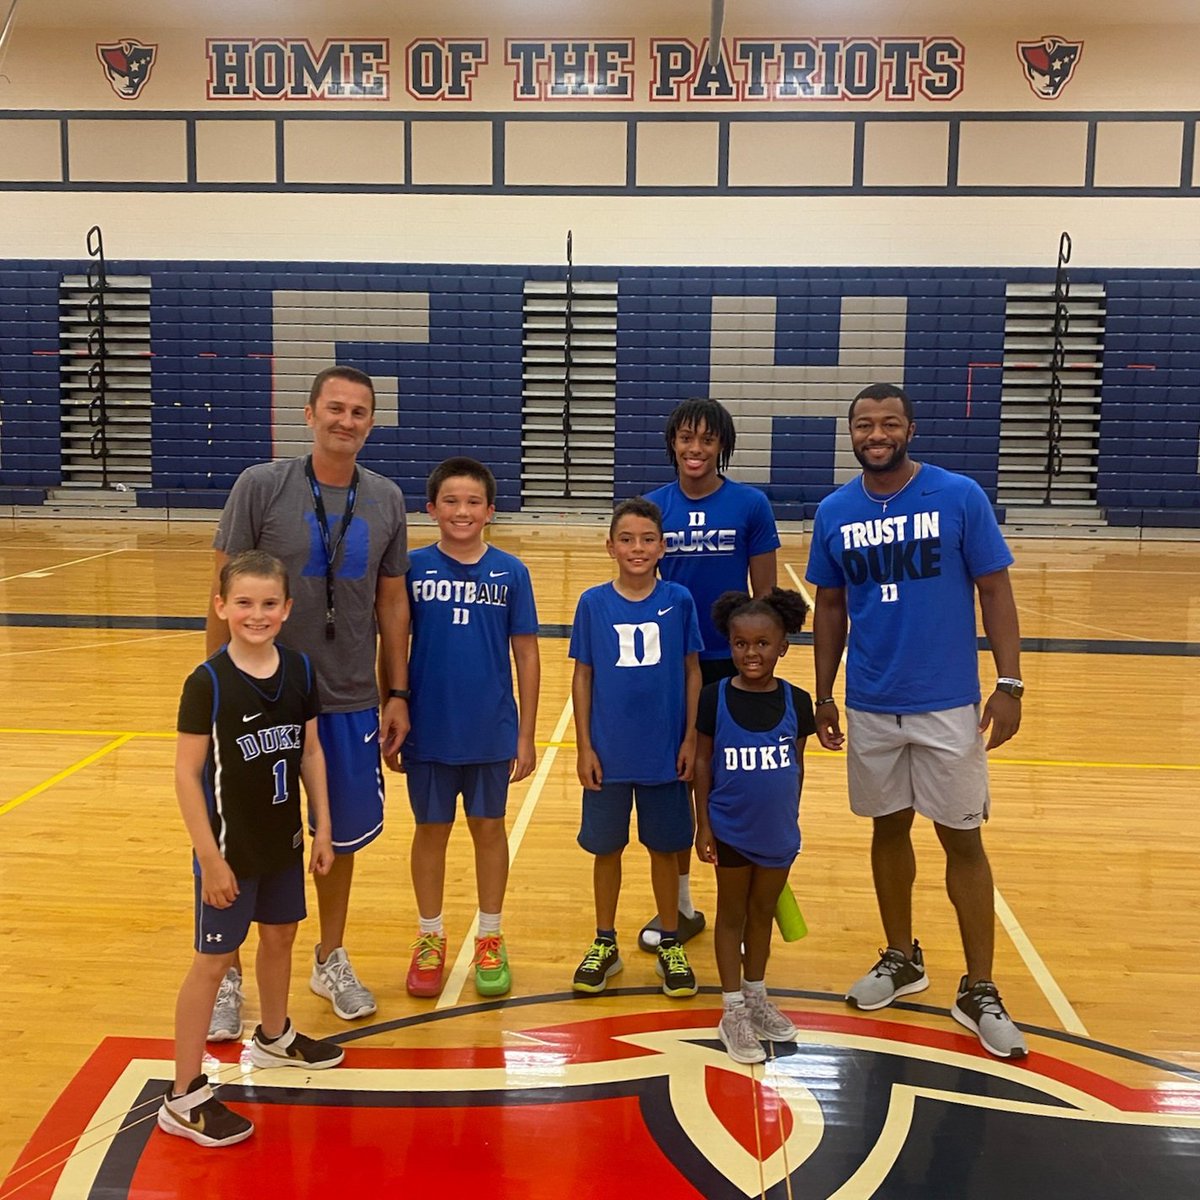 Great day of hoops at the Apex Friendship Basketball Camp this evening! Took a little time to pose with fellow Duke fans on 